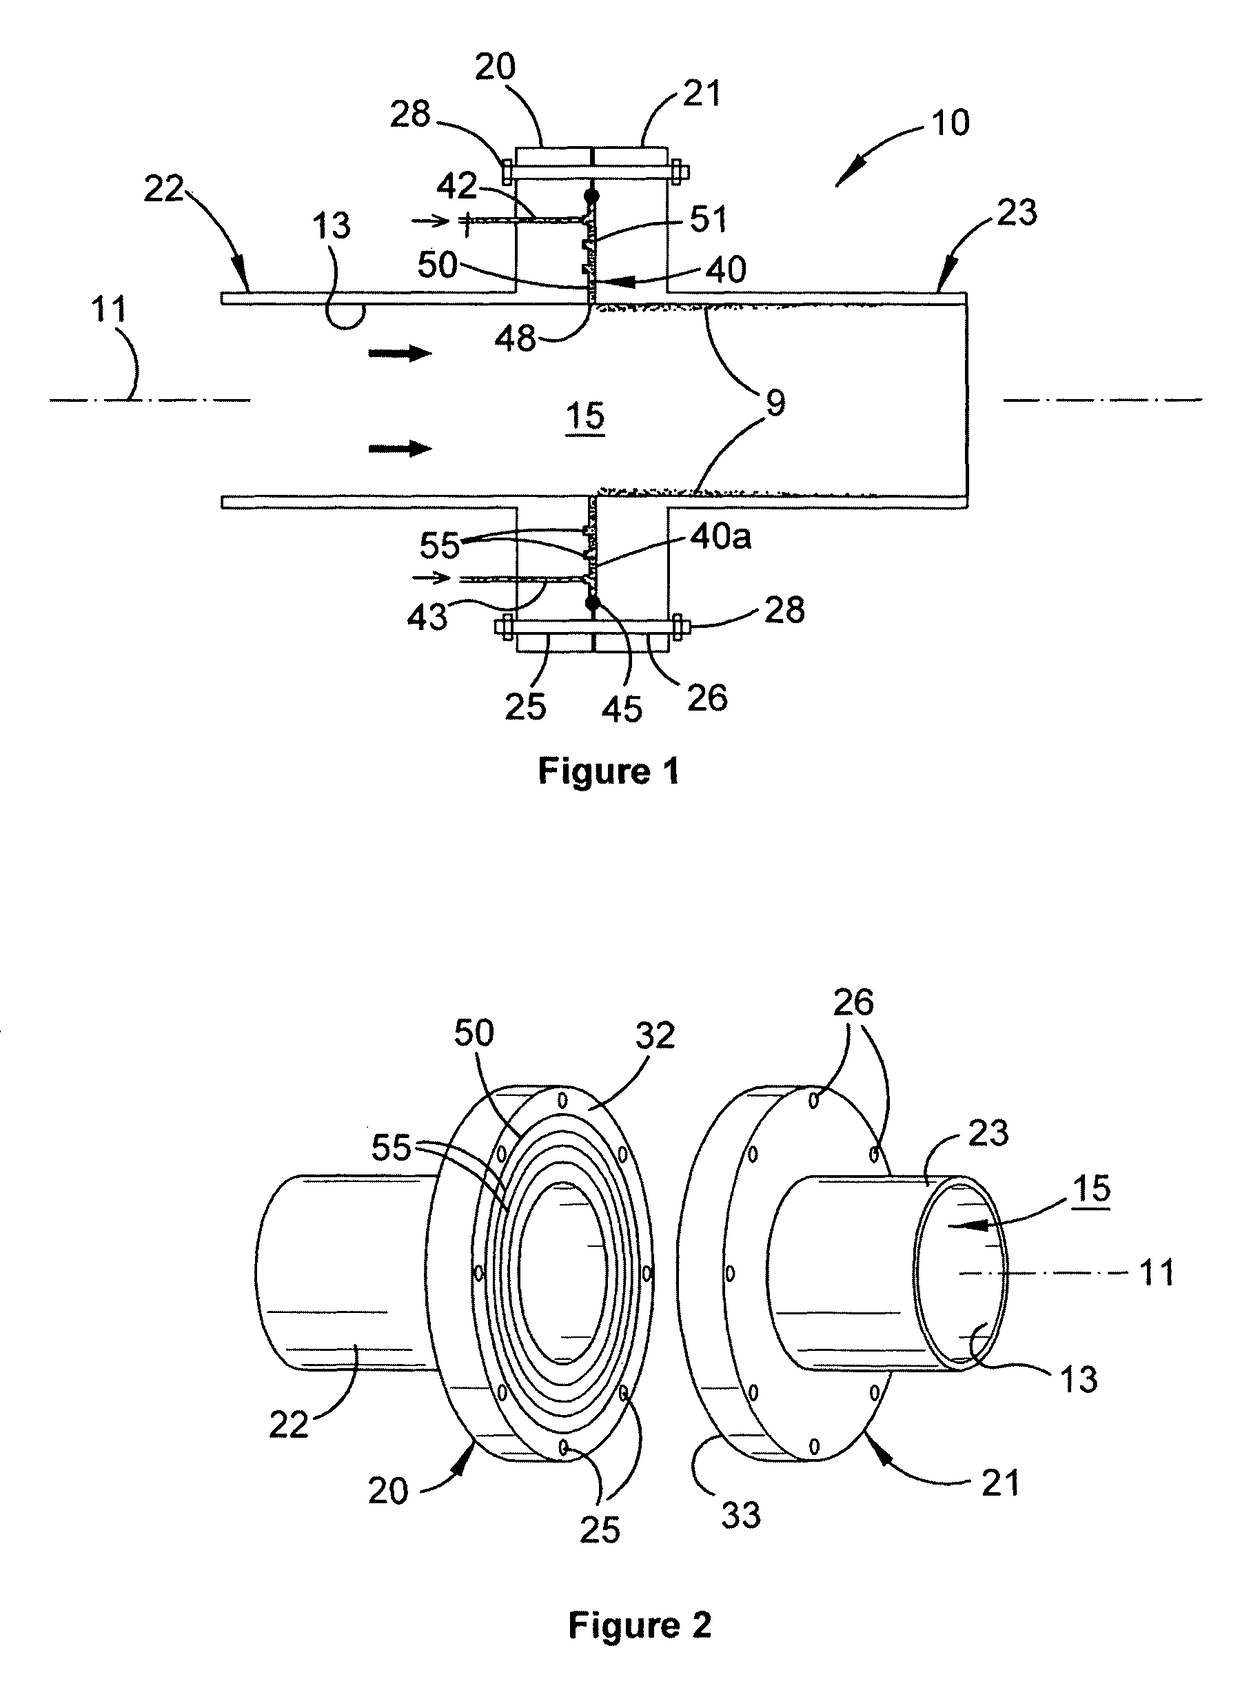 Reducing friction of a viscous fluid flow in a conduit